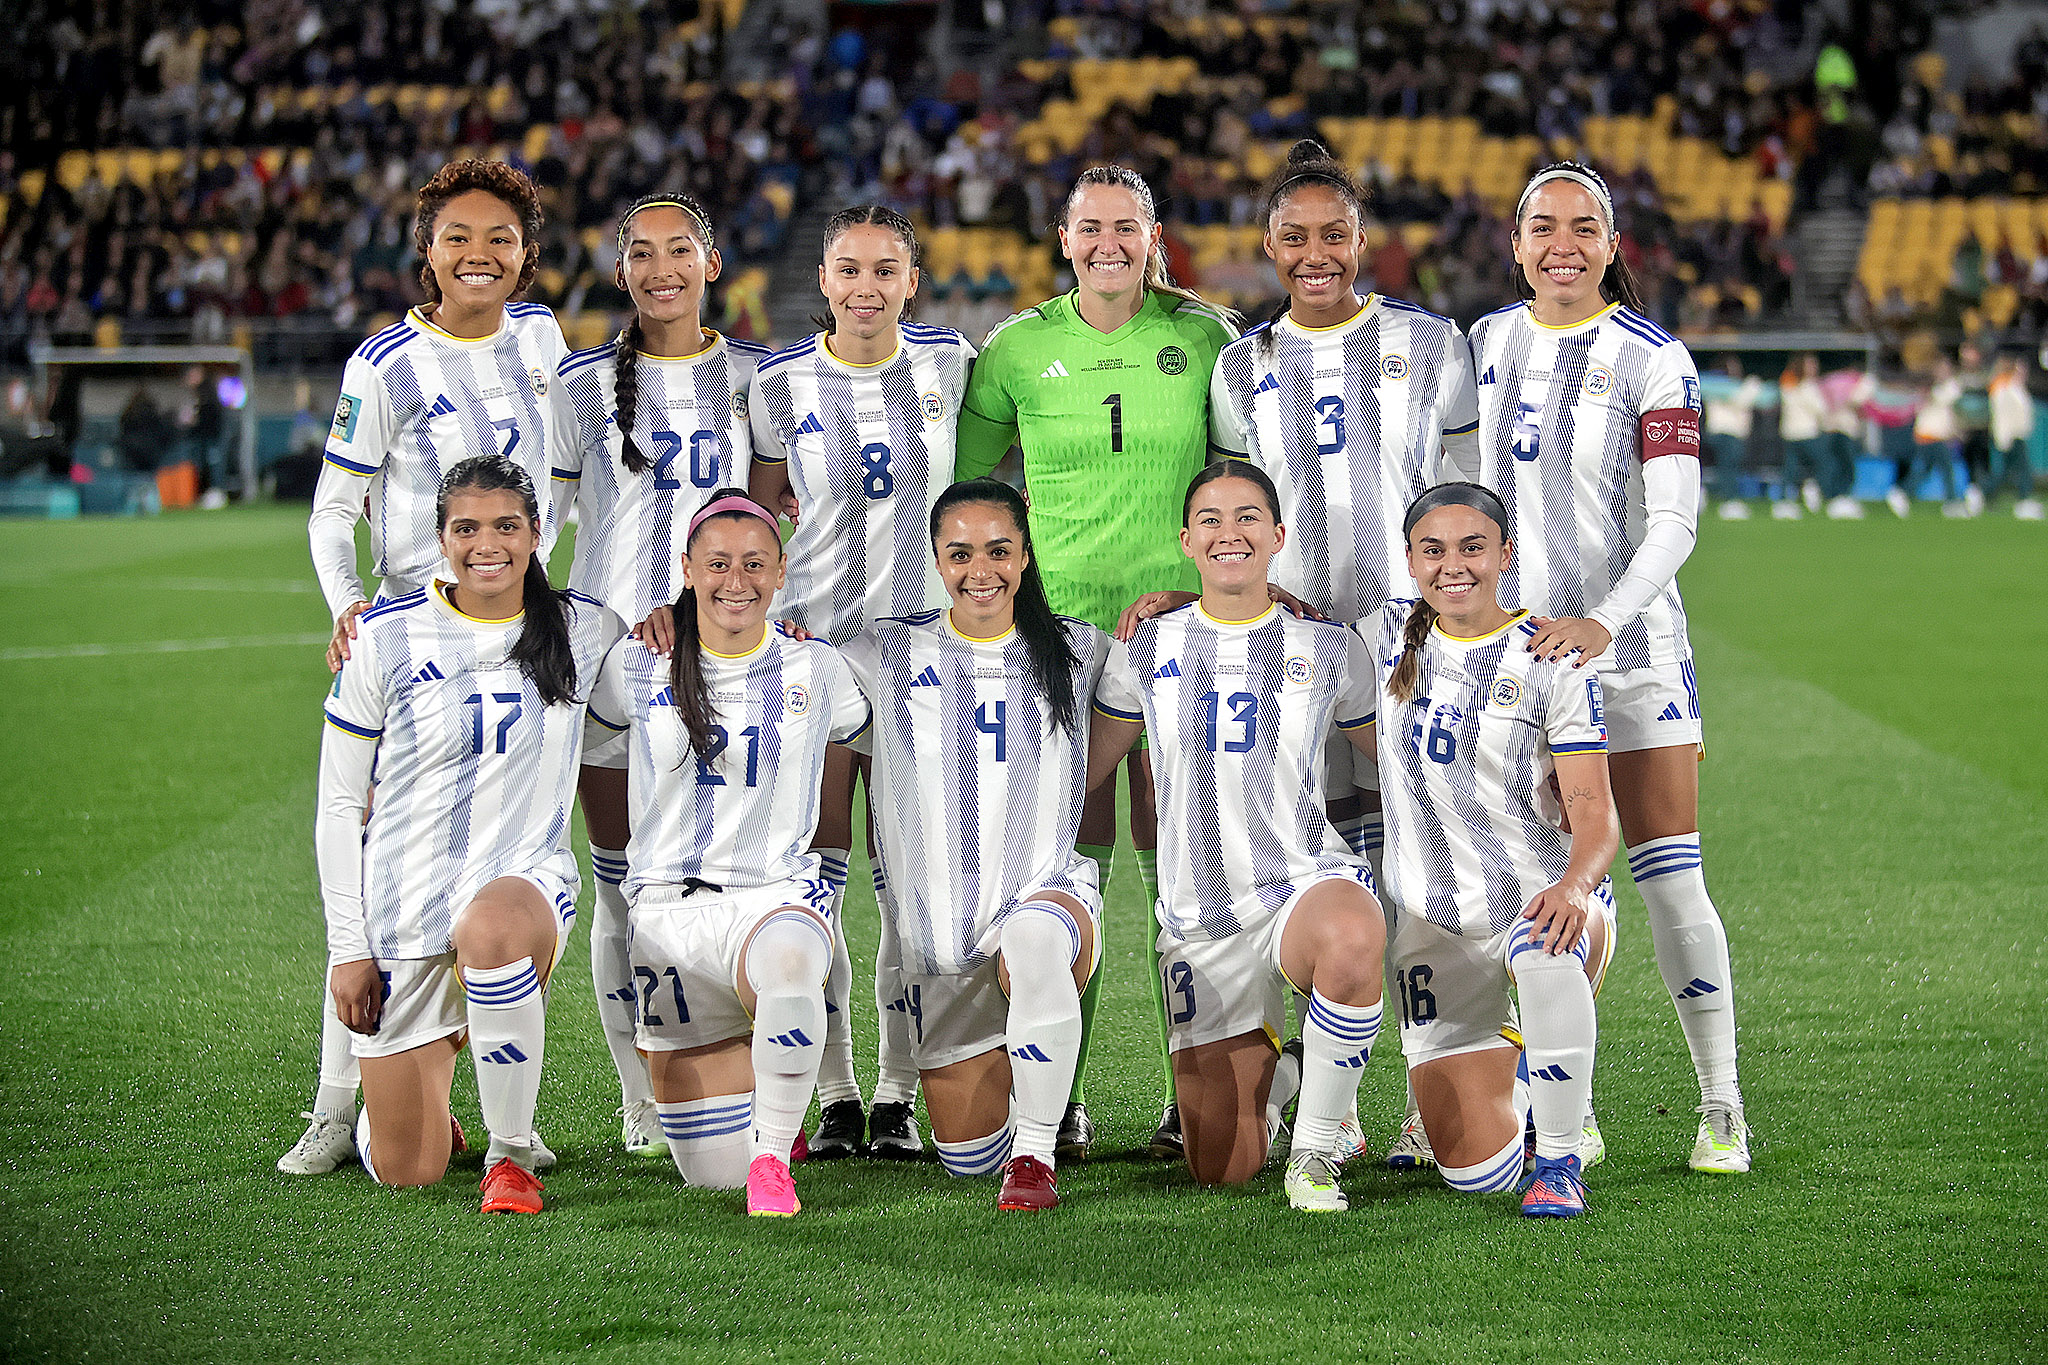 What the Filipinas’ World Cup Victory Means for Young Girls and the Filipino Diaspora